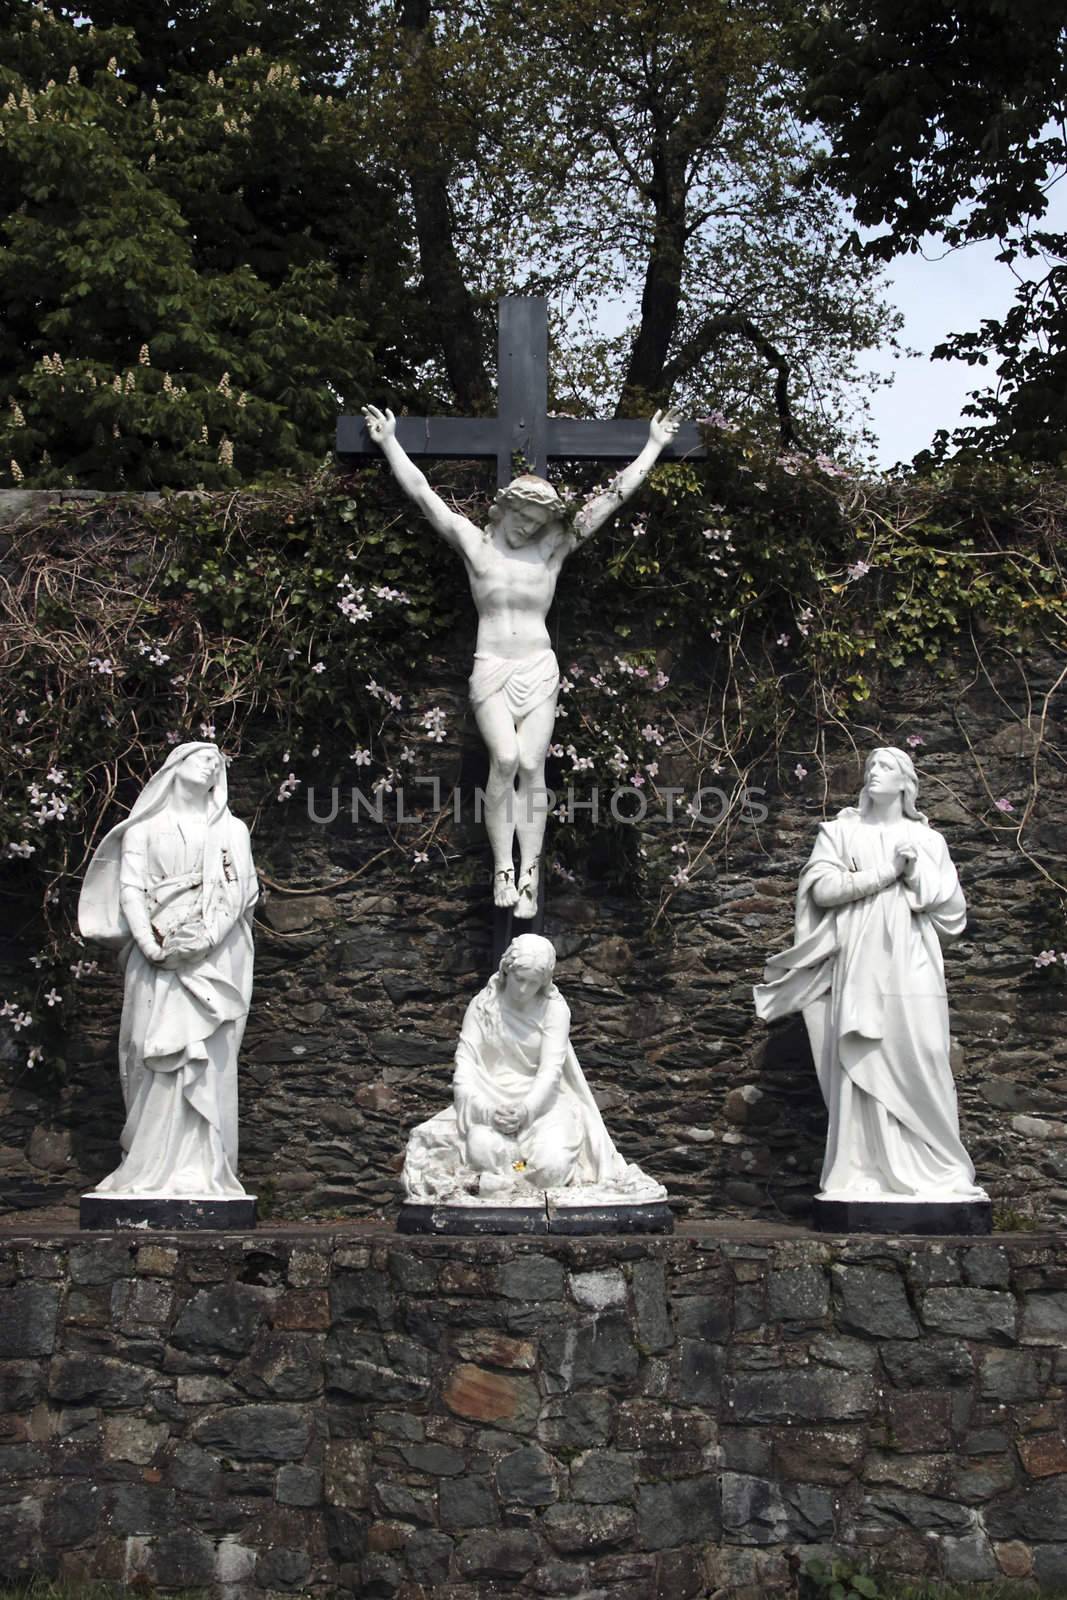 a statue of the crucifiction